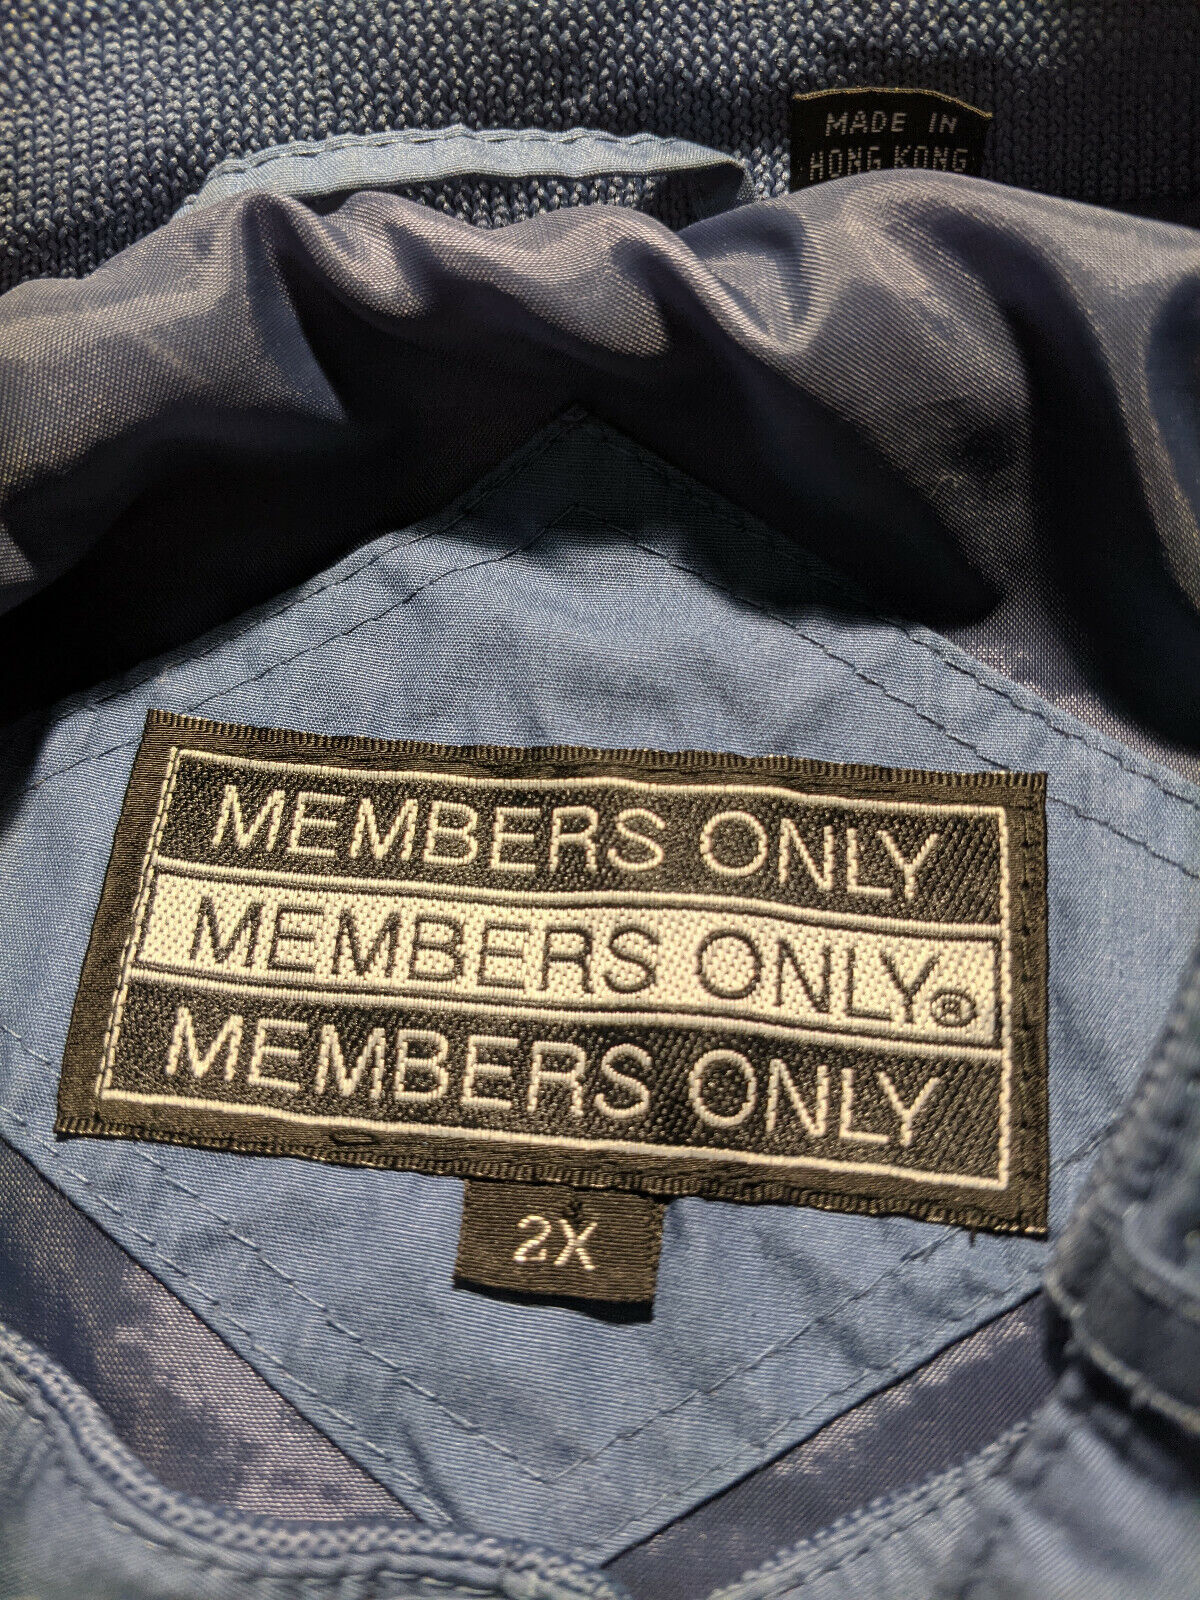 Members Only 2XL Light Baby Blue Vintage 1990s Ic… - image 3